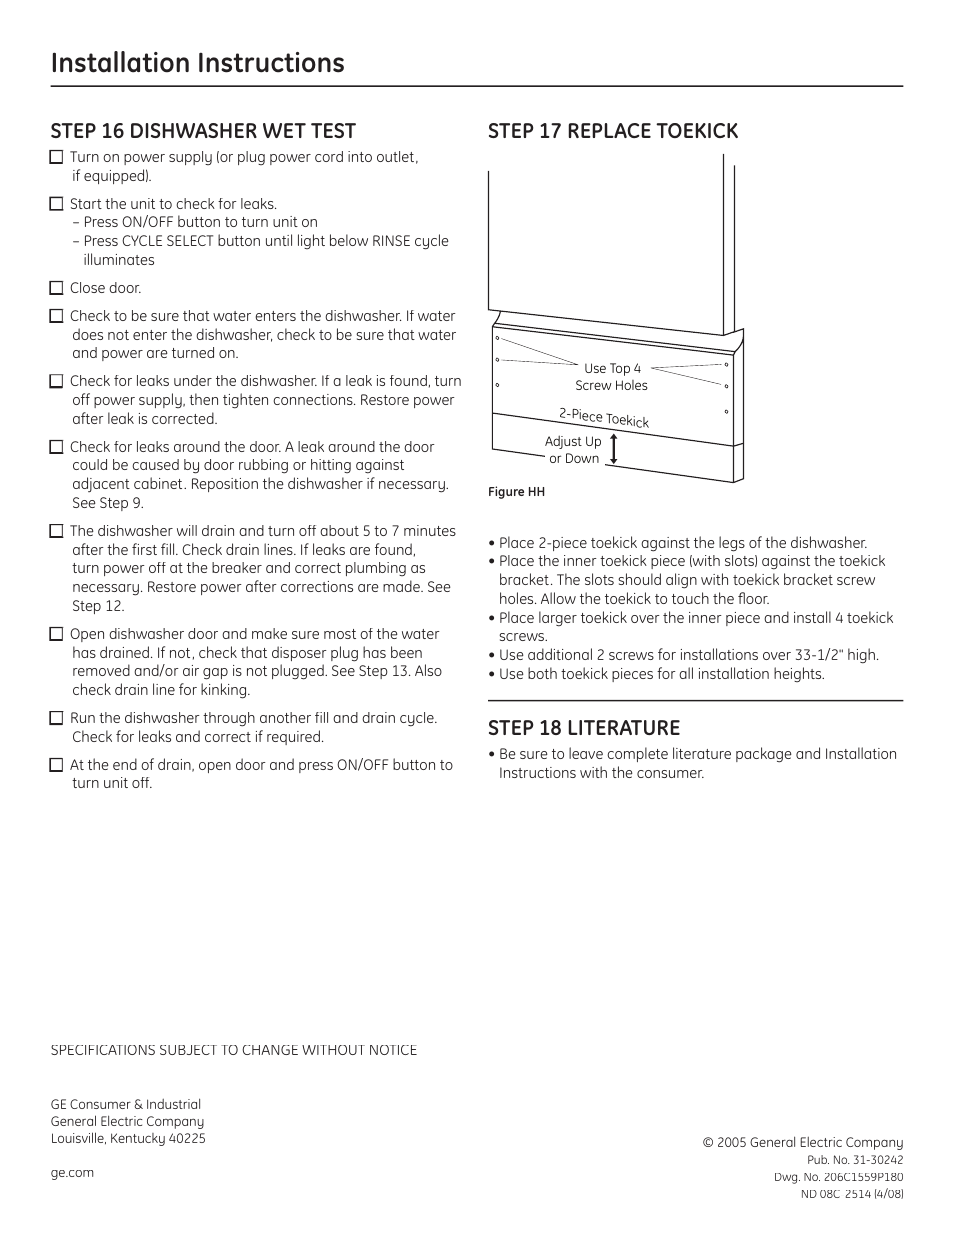 Installation instructions, Step 16 dishwasher wet test, Step 17 replace ...